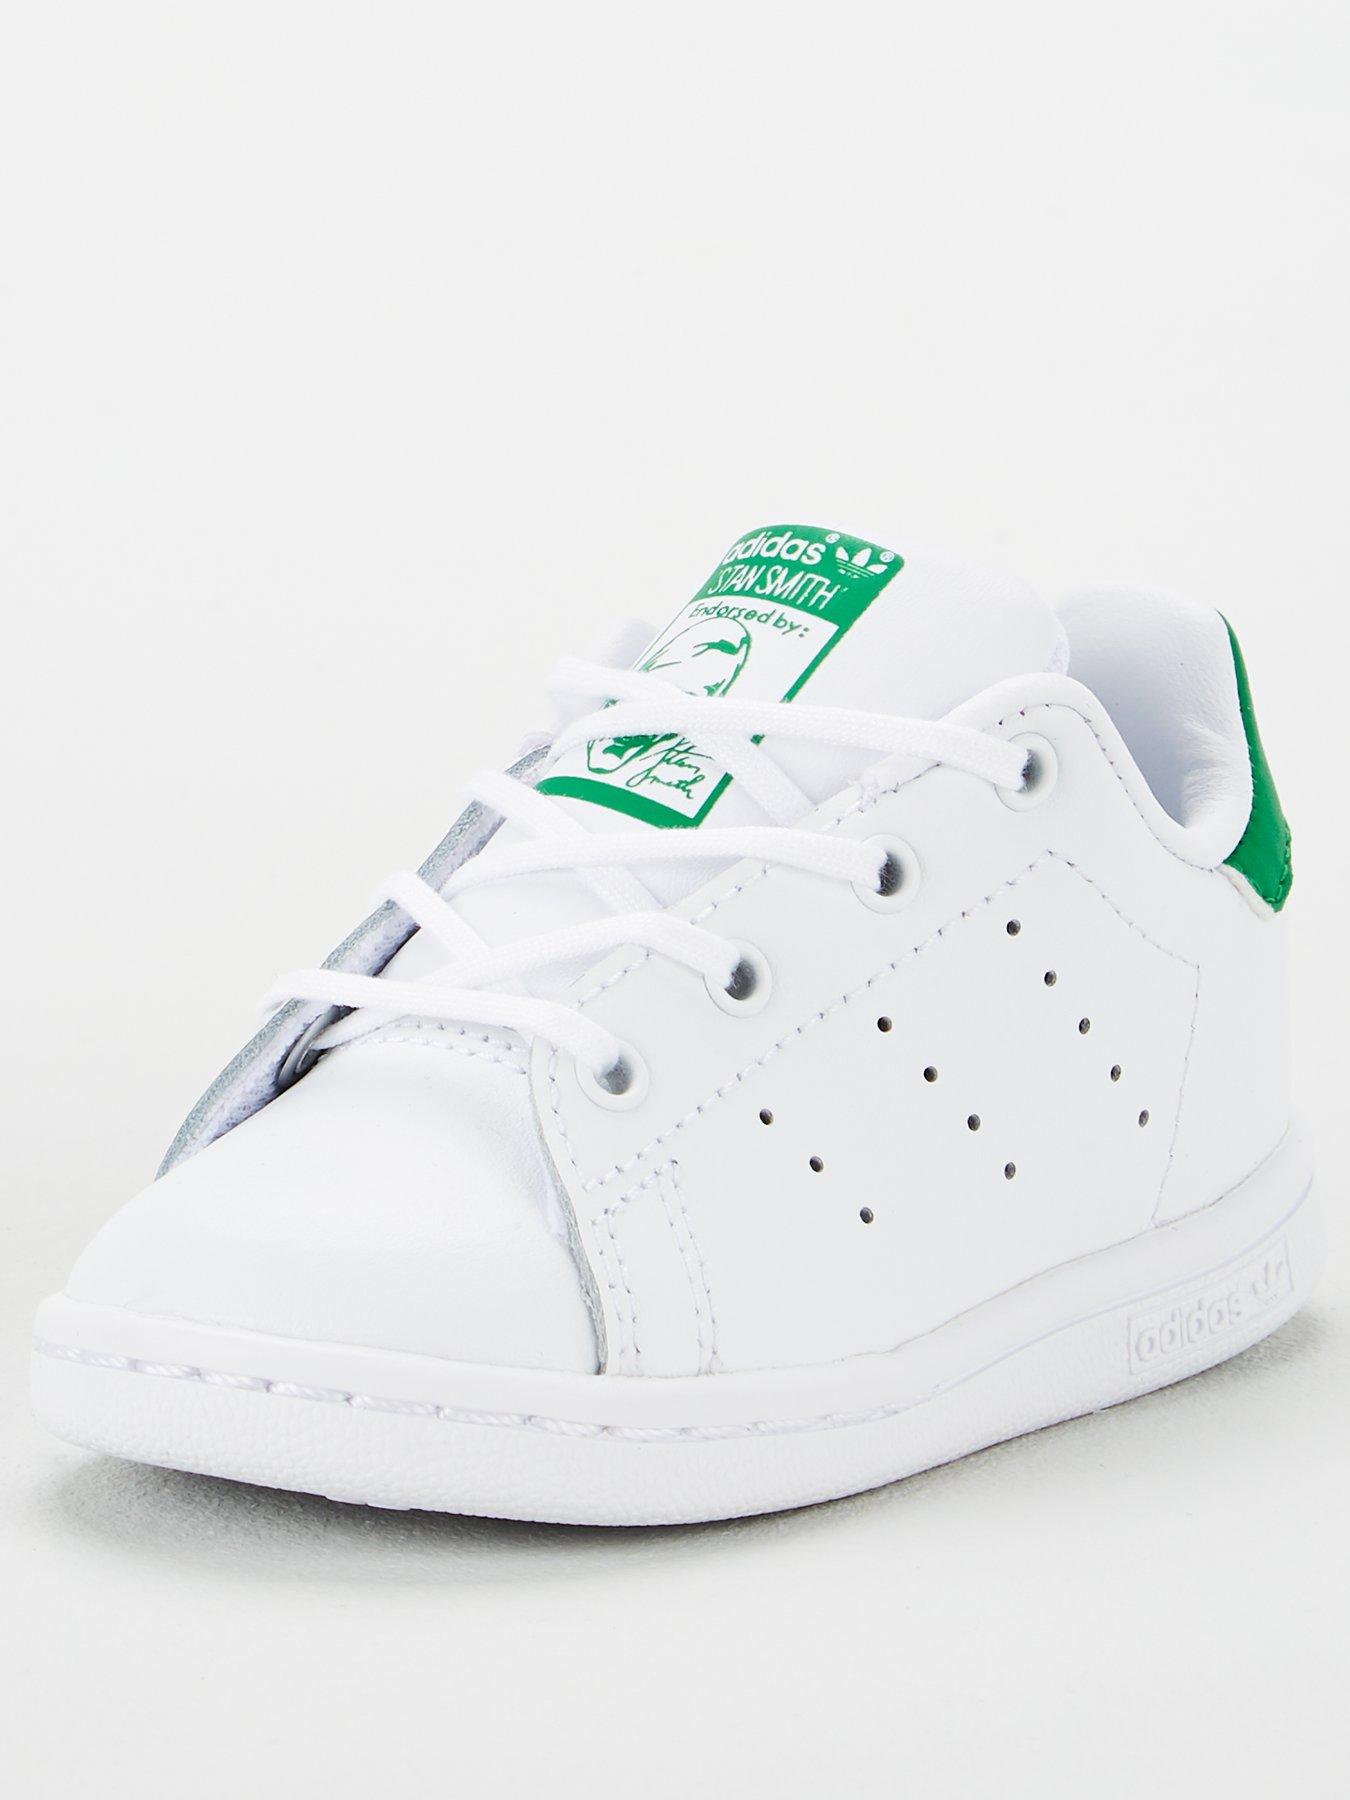 can stan smiths go in the washing machine